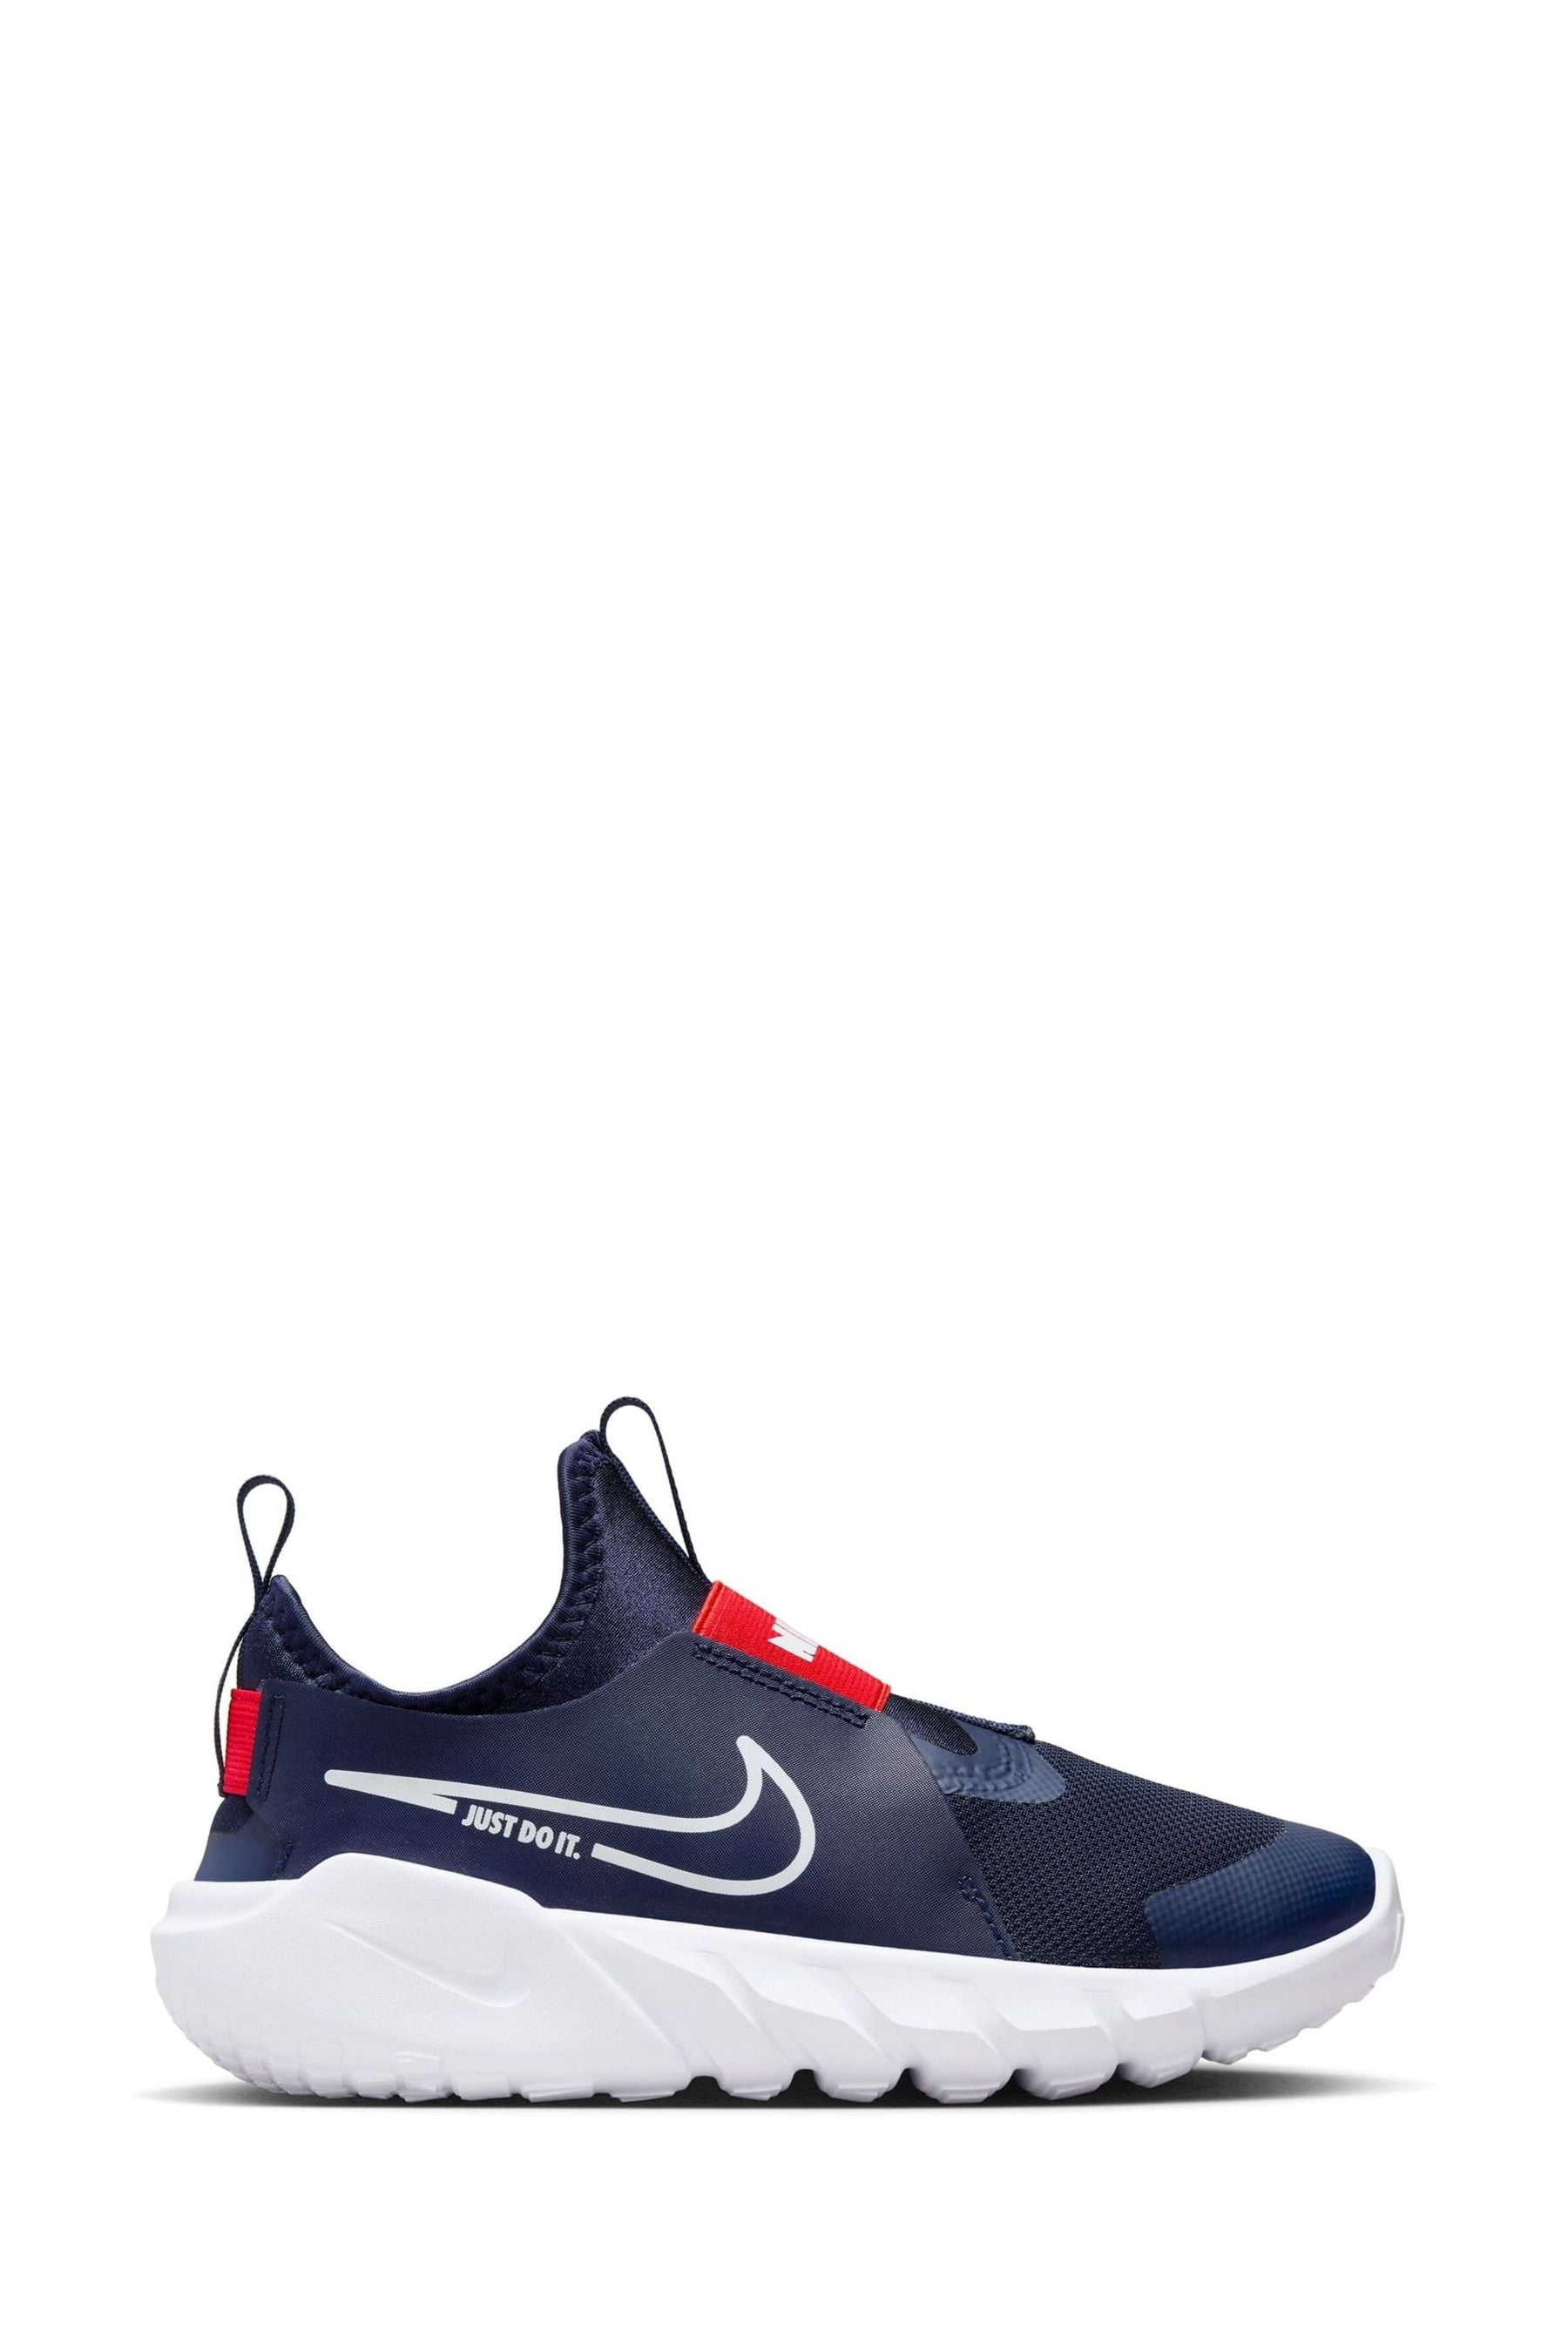 Buy Nike Navy Flex Runner Youth Trainers from the Next UK online shop